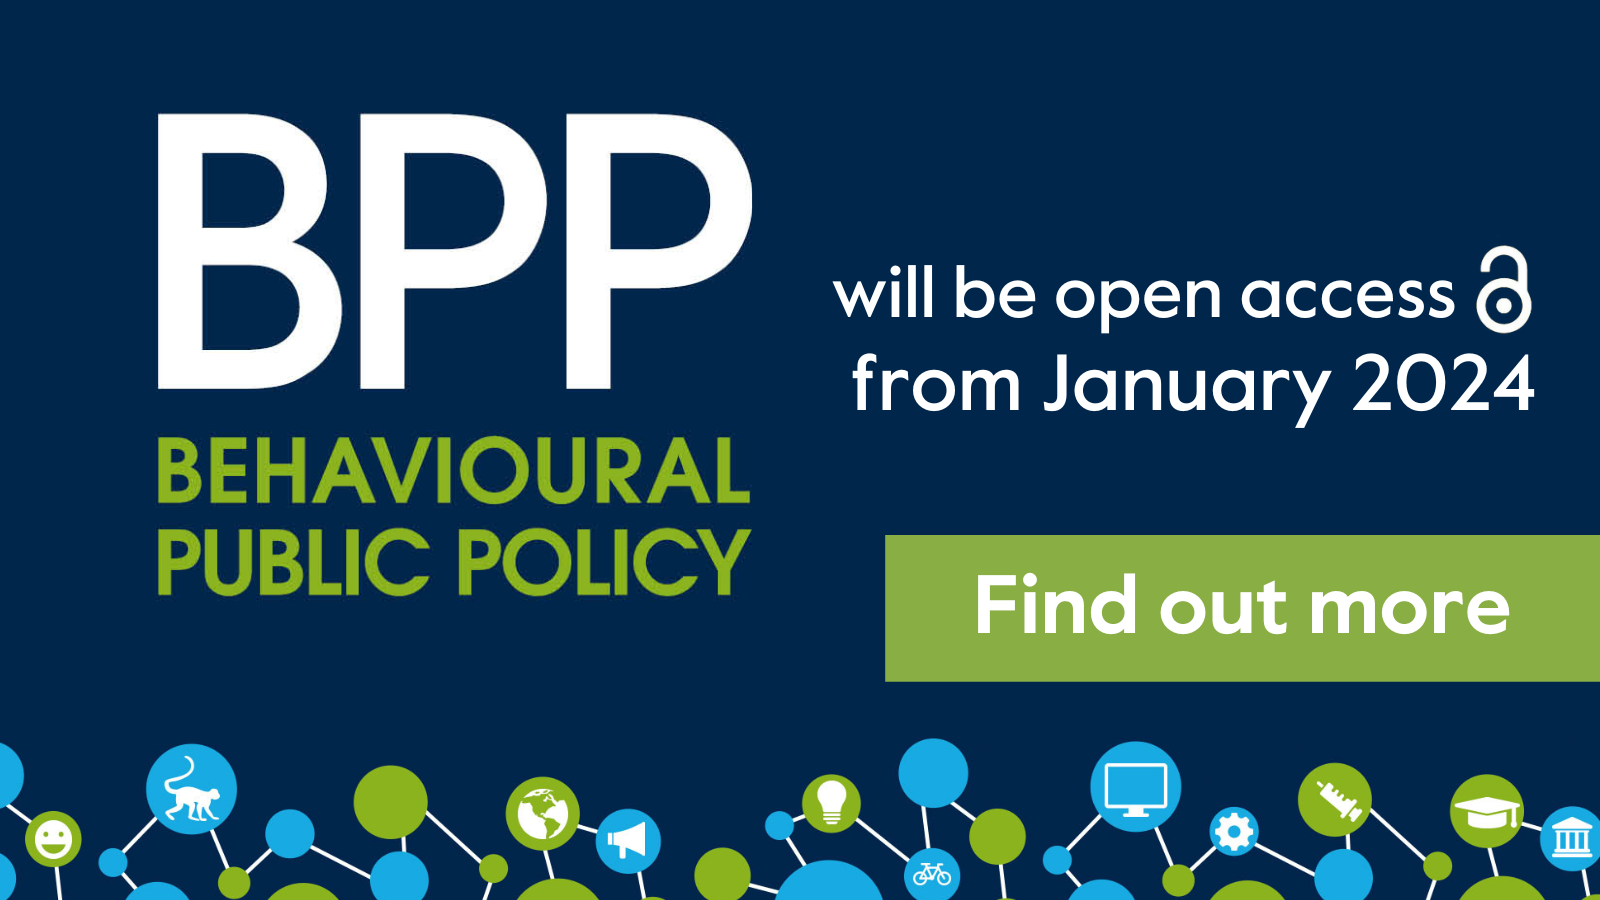 Behavioural Public Policy will be open access from January 2024